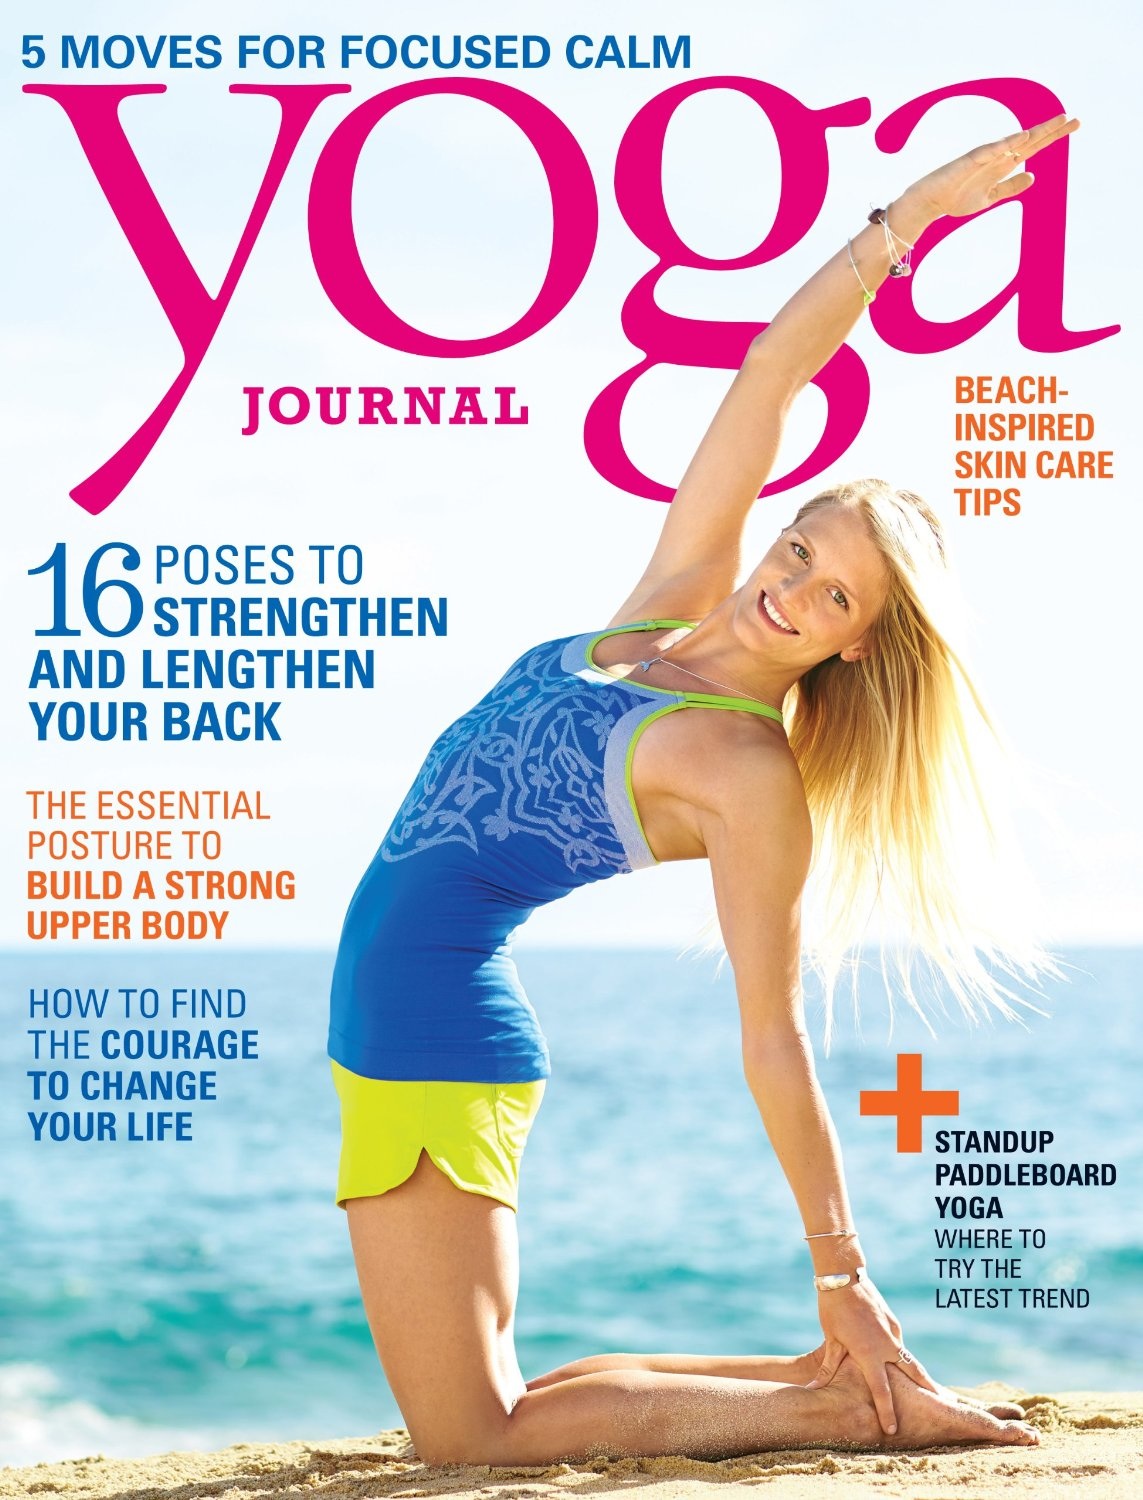 Popular Science & Yoga Journal Magazine Deals! (Today Only, Oct. 4th ...